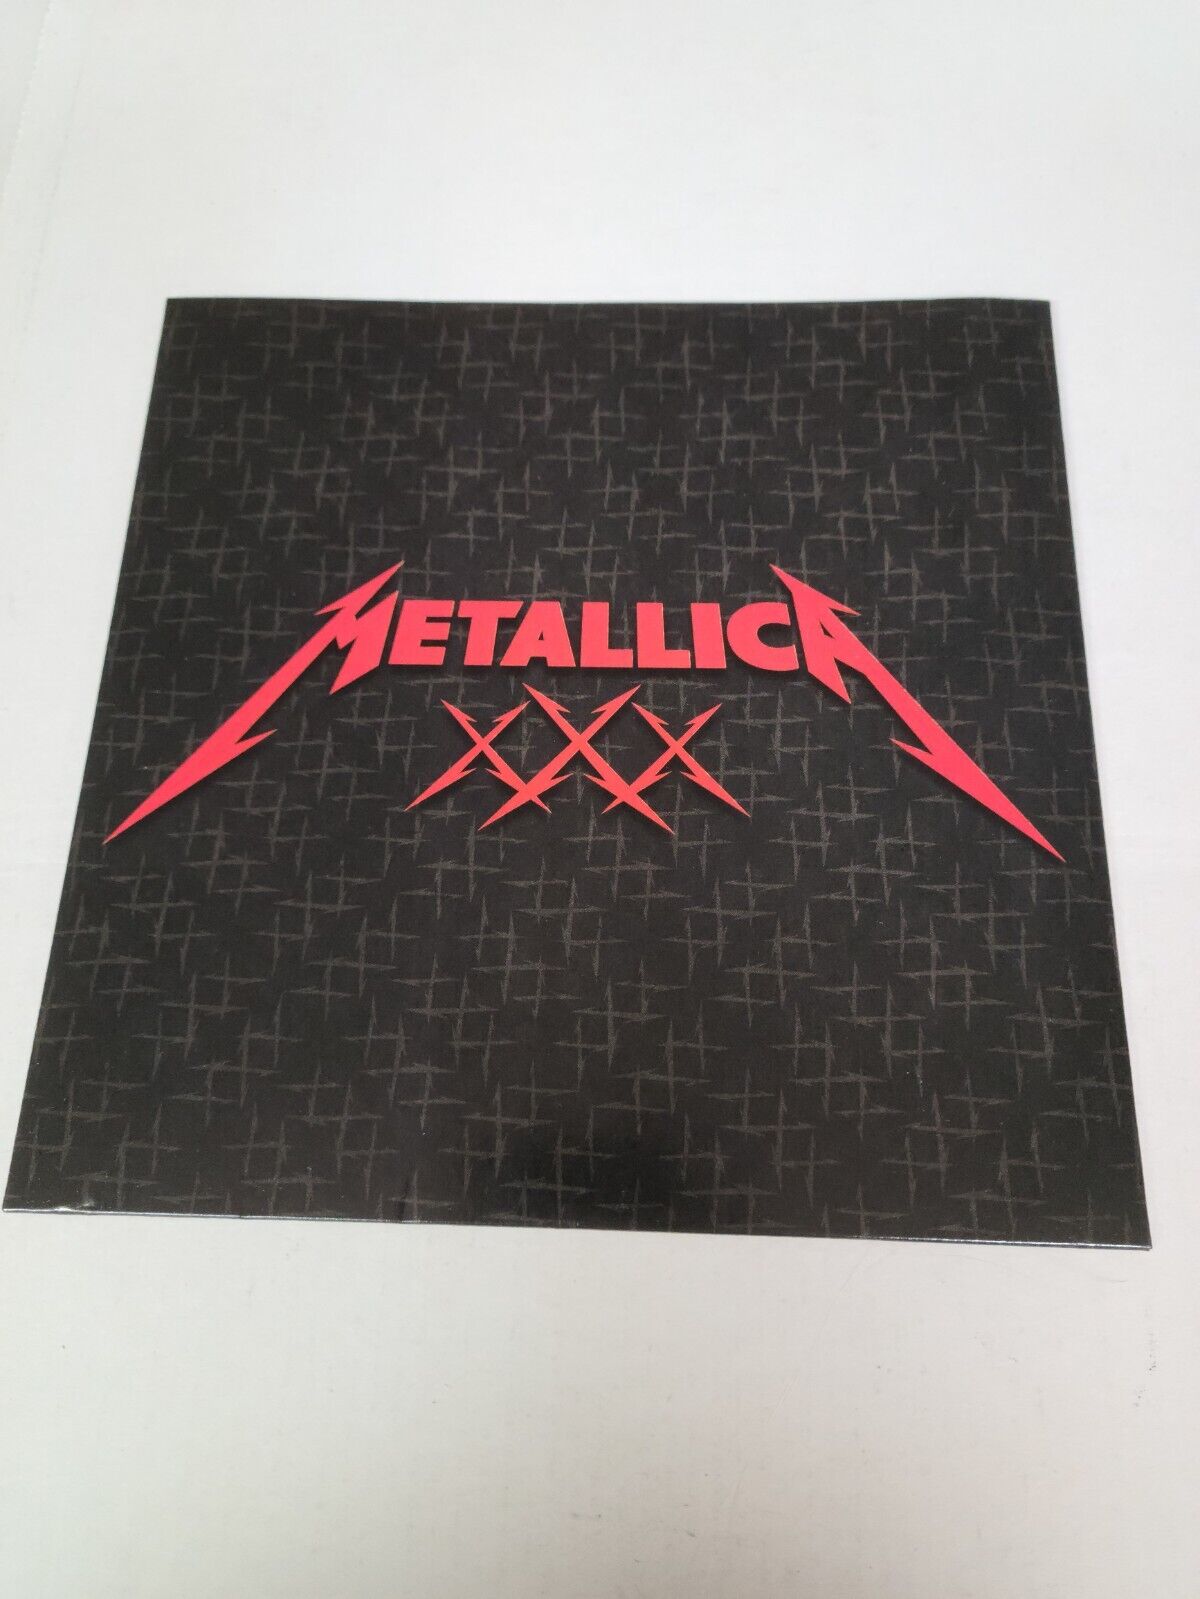 METALLICA - XXX The First 30 Years - 2012 (NM) 7" 45 - (Looks New) - #SW0030